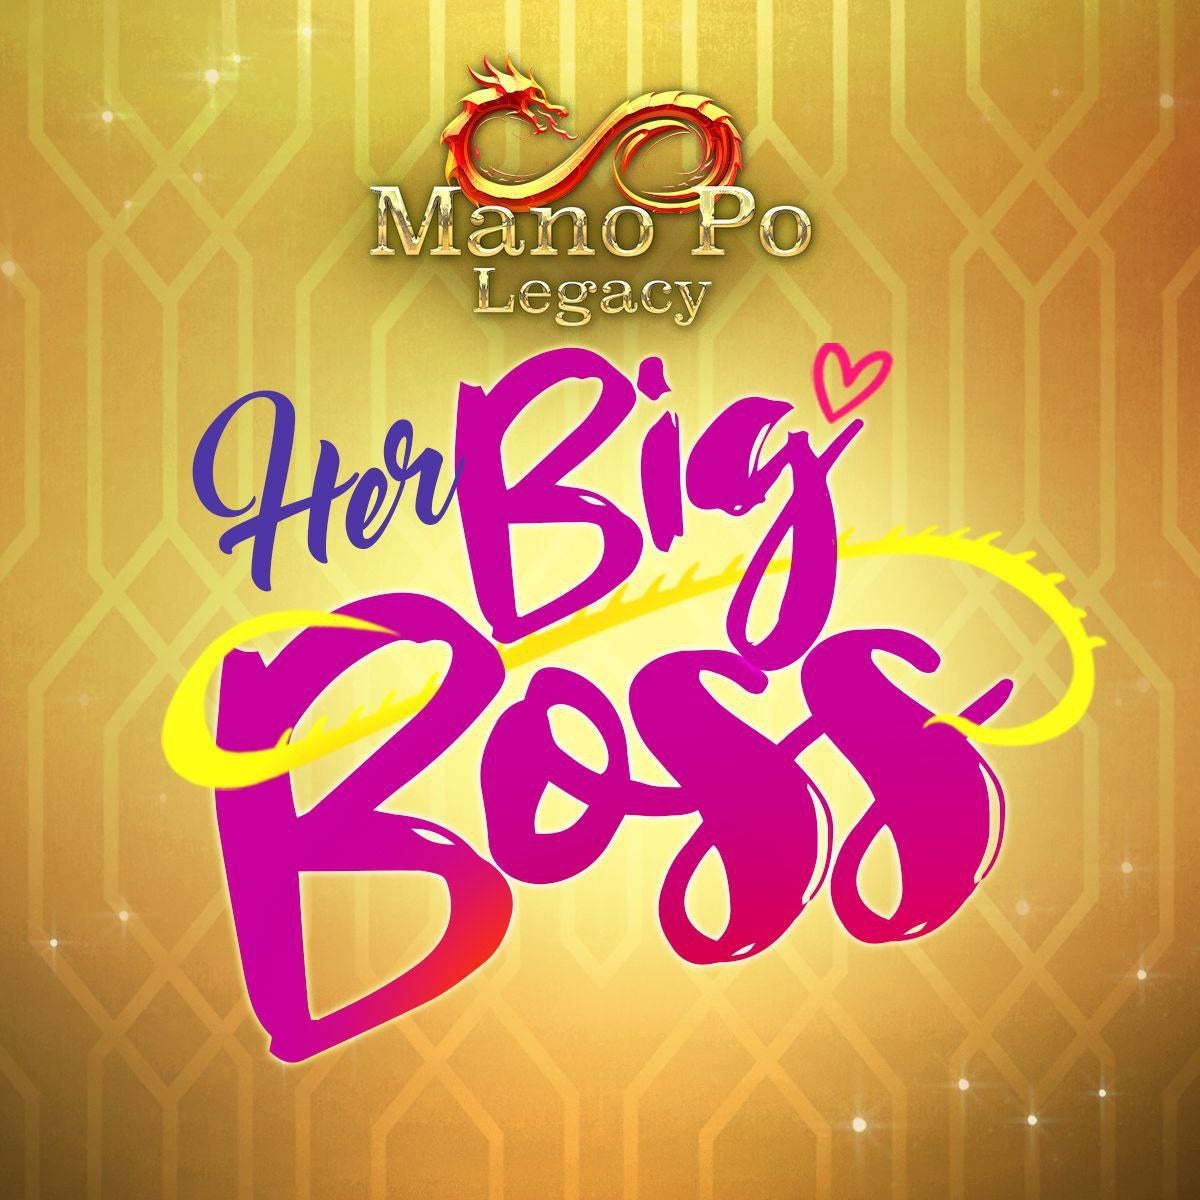 TV ratings for Mano Po Legacy: Her Big Boss in Mexico. GMA TV series